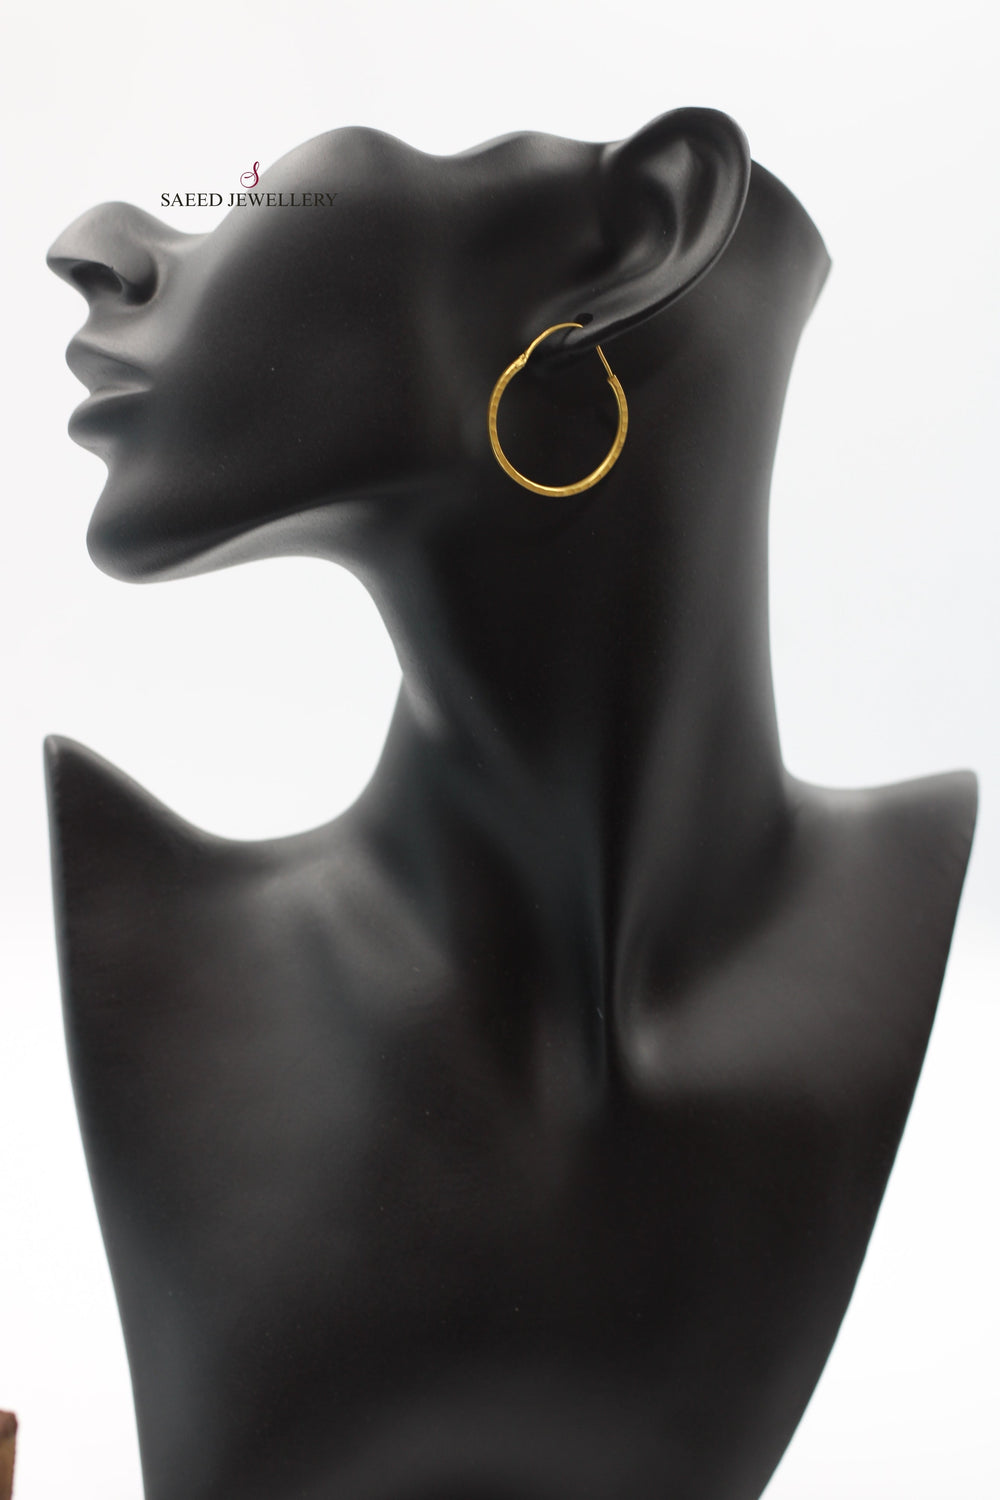 21K Rounded Earrings Made of 21K Yellow Gold by Saeed Jewelry-حلق-ذبلة-كبير